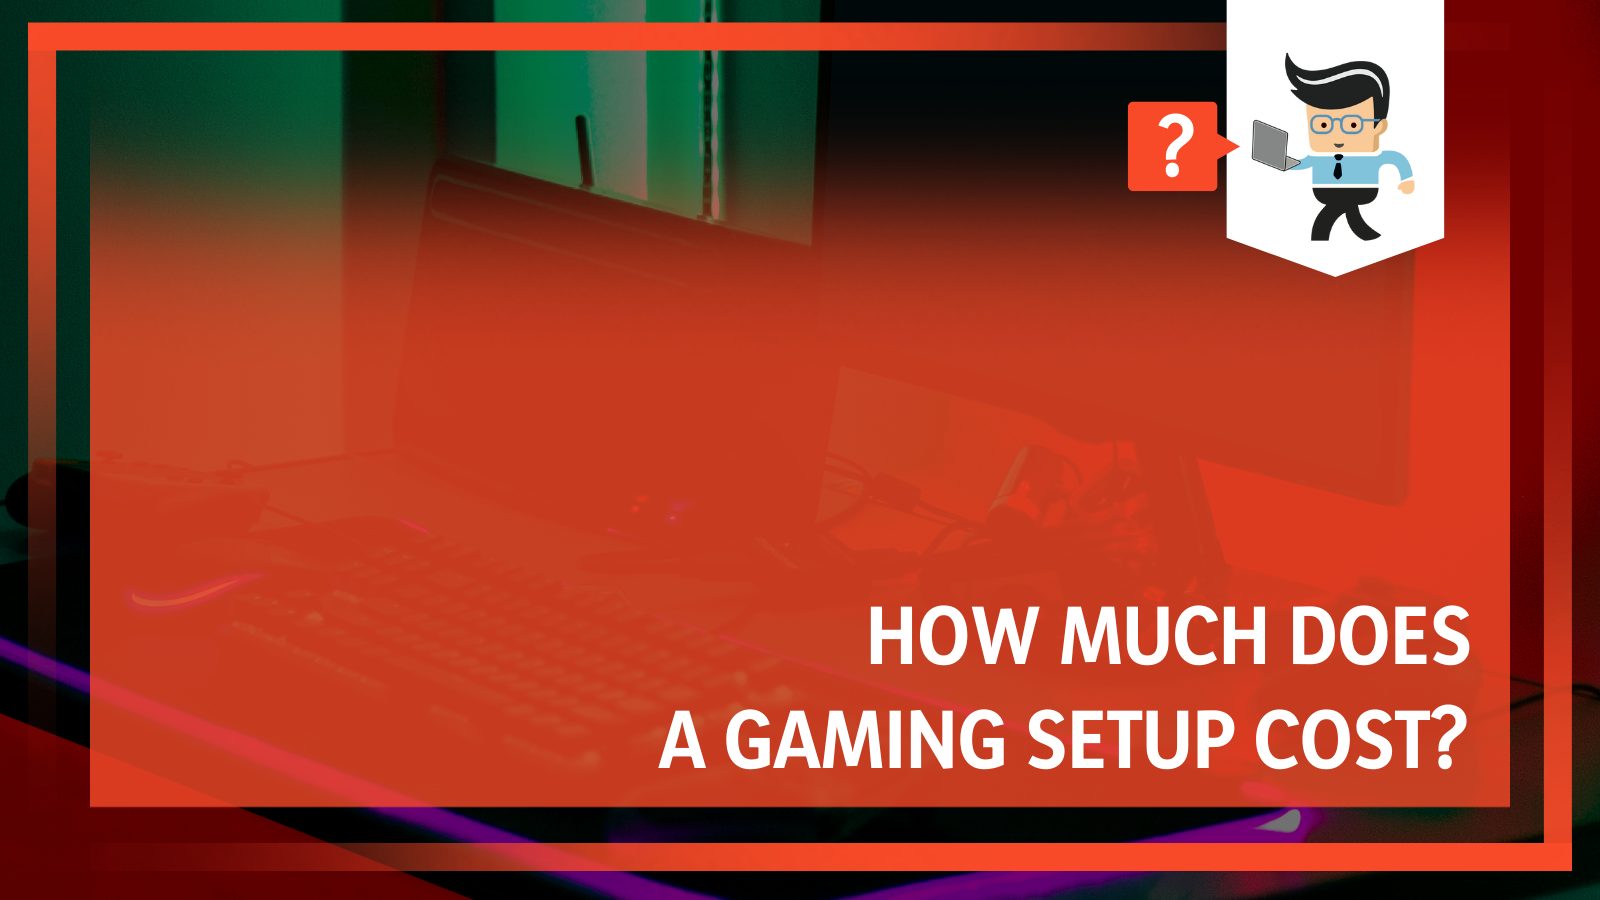 How Much Does a Gaming Setup Cost